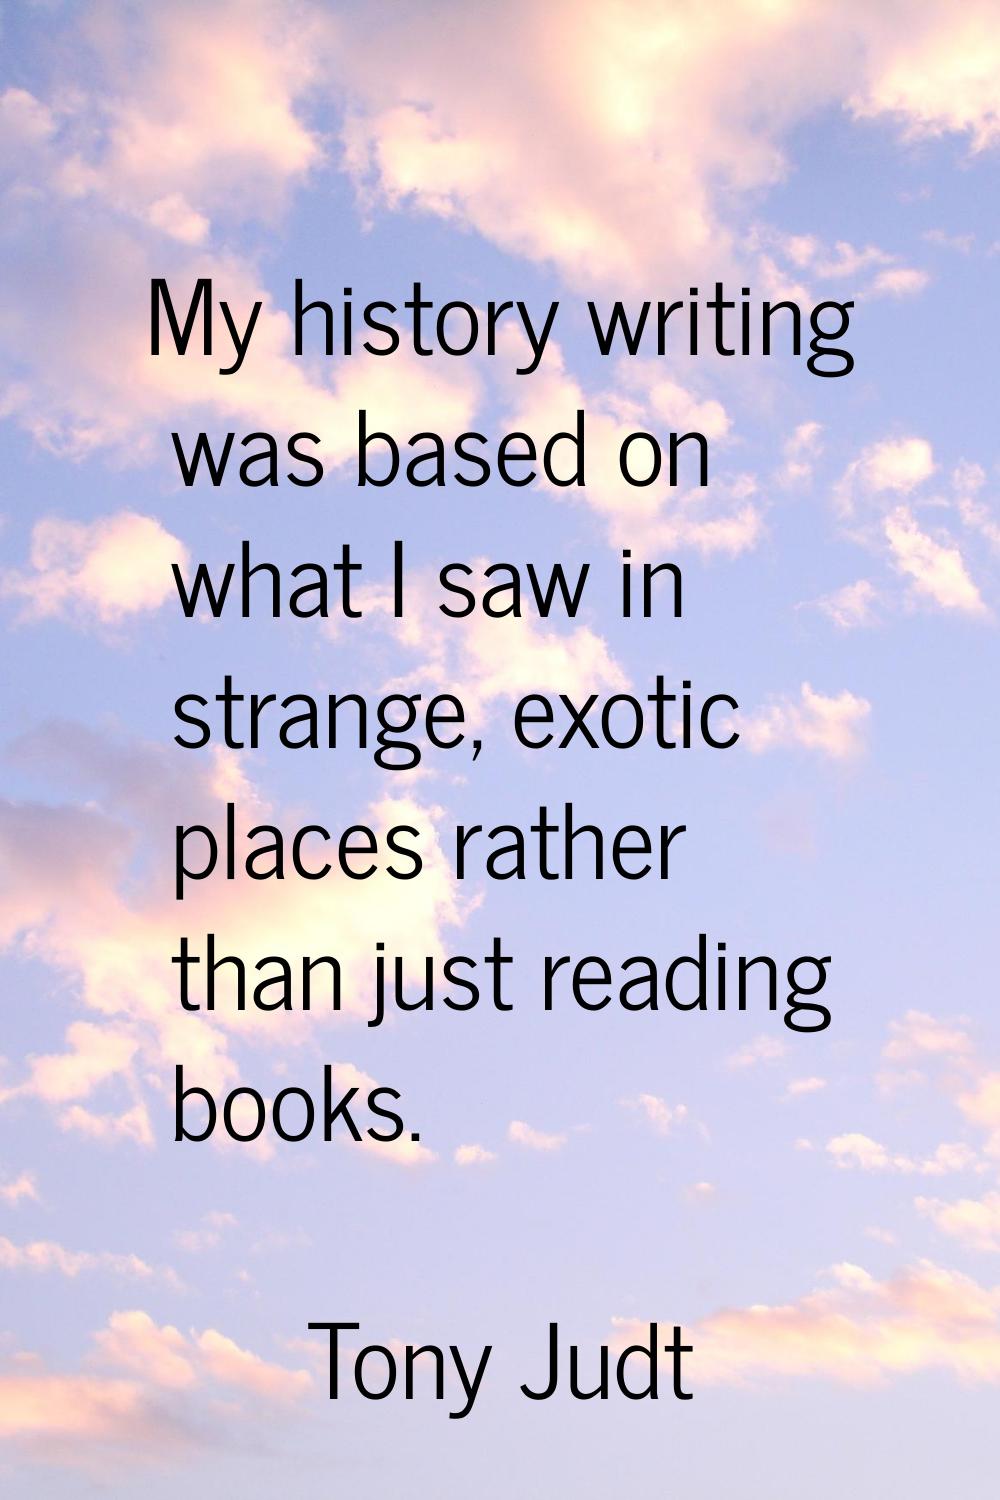 My history writing was based on what I saw in strange, exotic places rather than just reading books